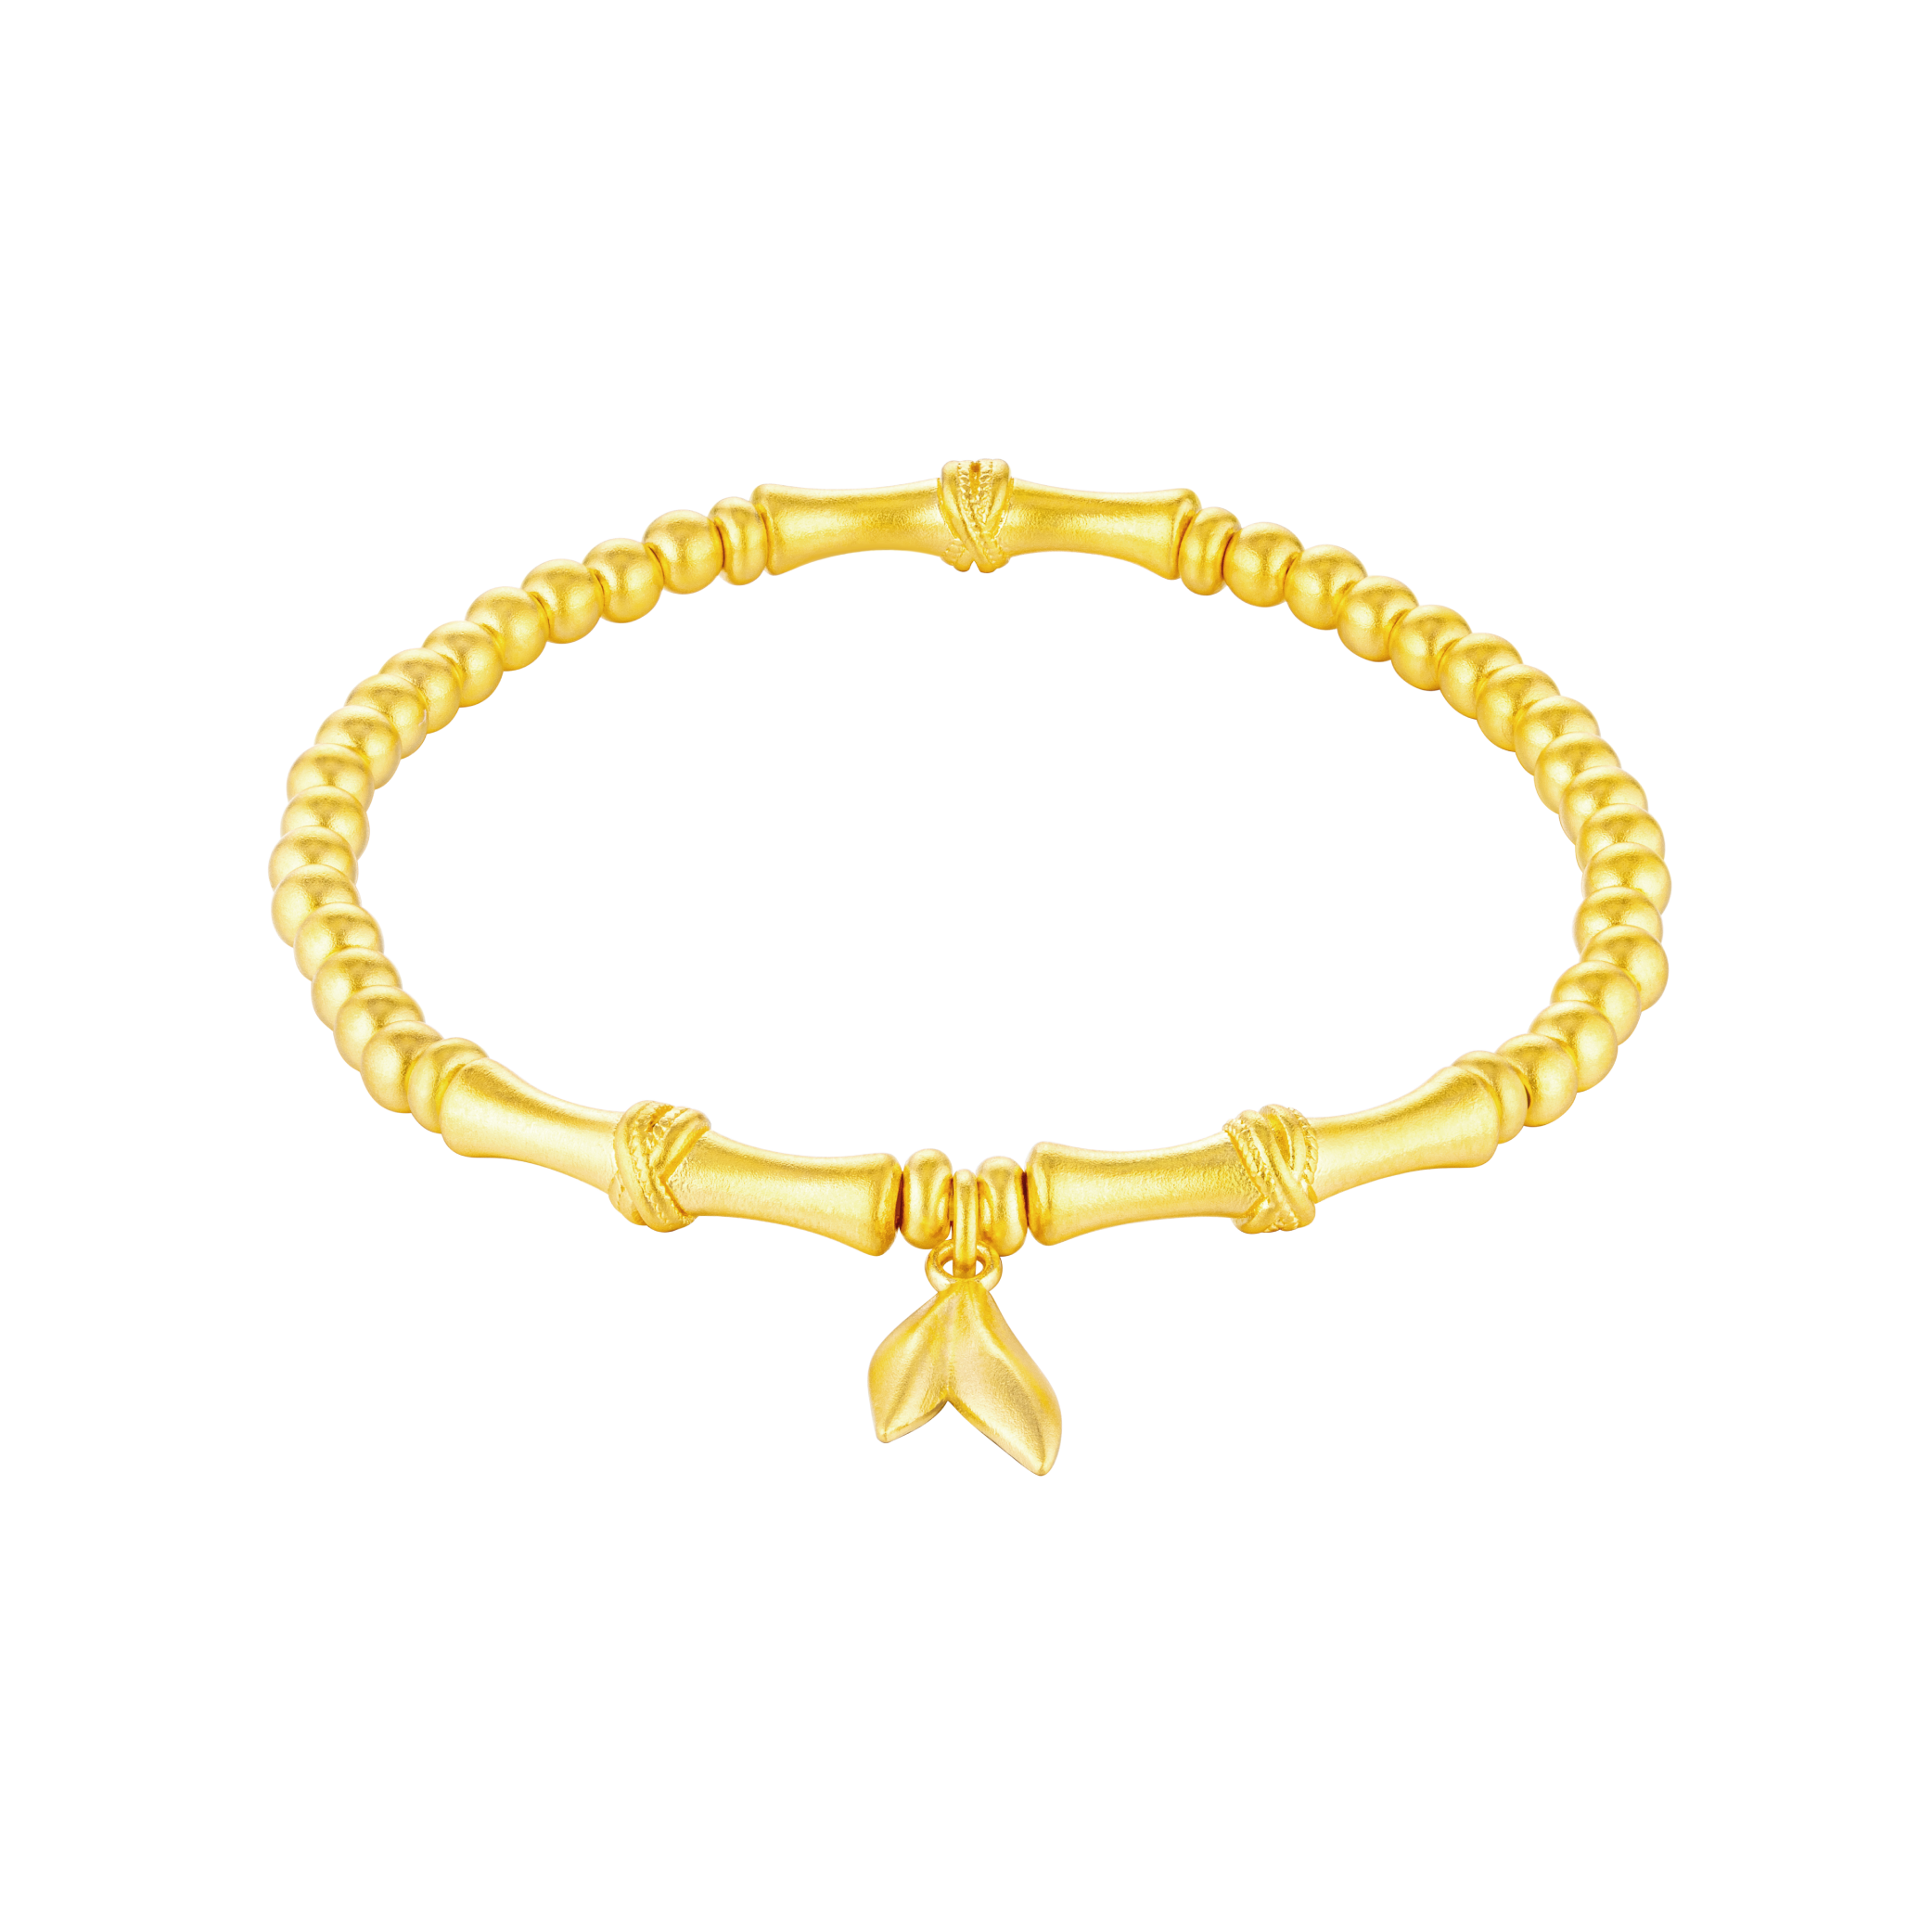 Heirloom Fortune Collection "Perfect & Bless" Gold Bracelet